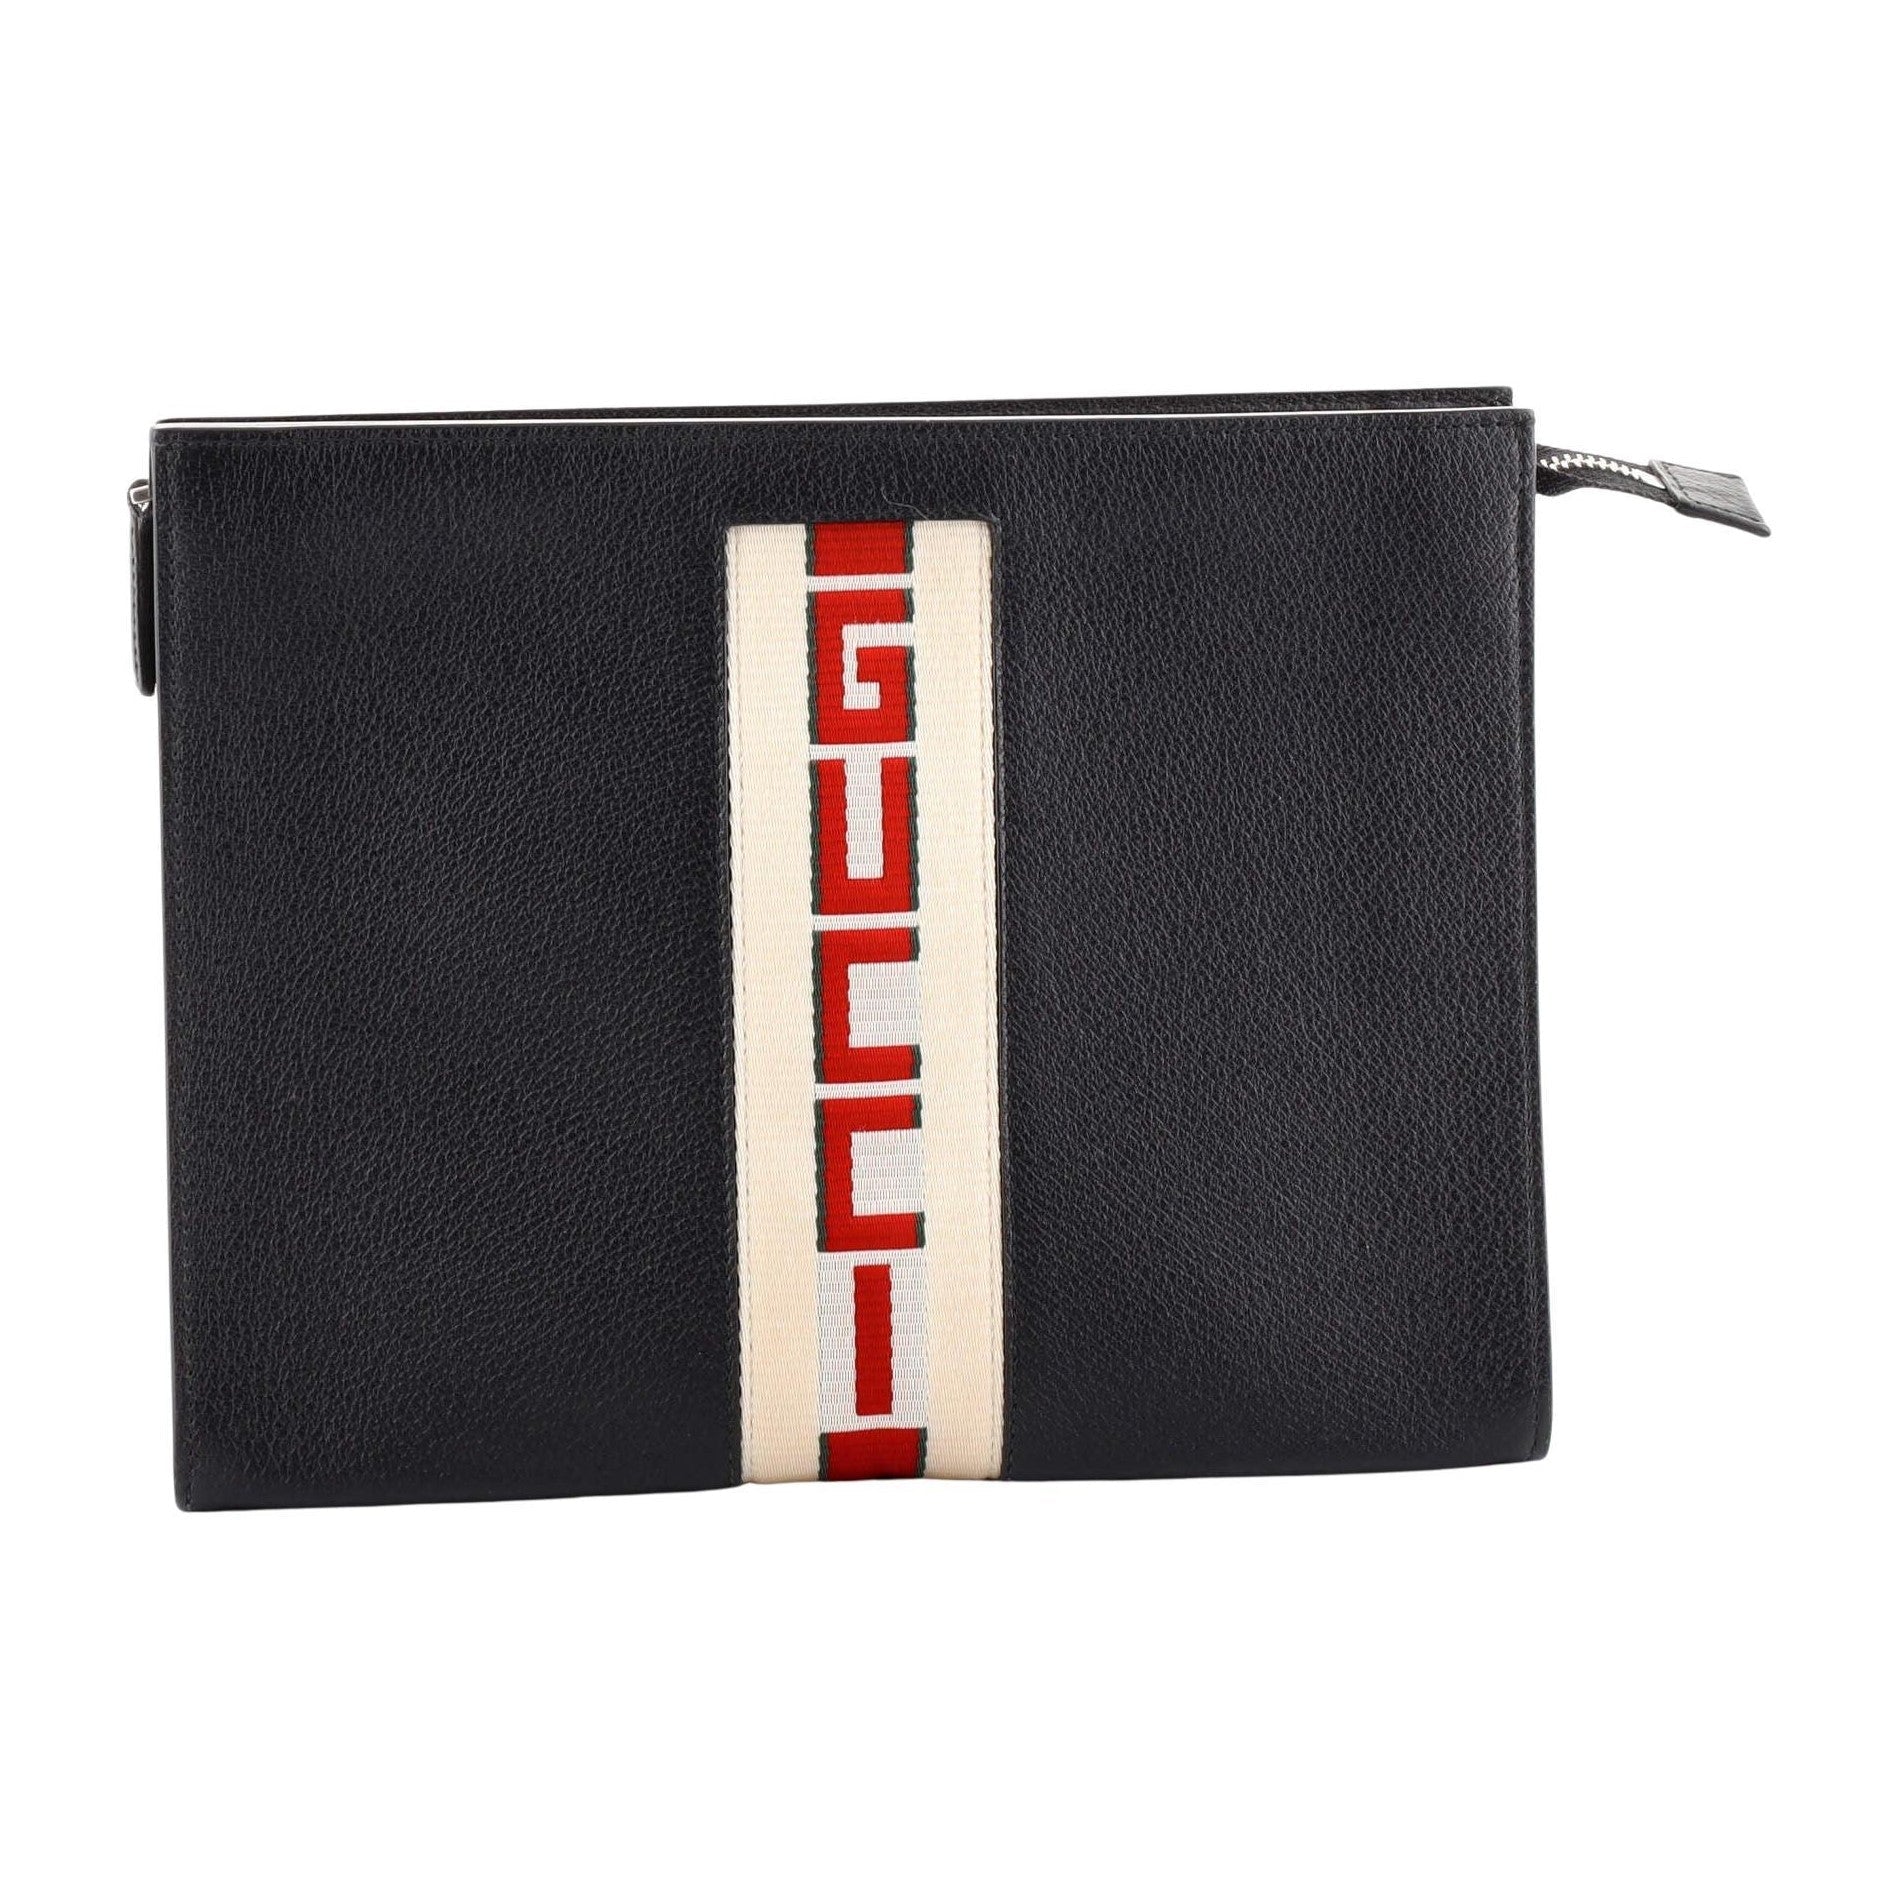 Gucci Sport Black Leather Cosmetic Case 475316 at_Queen_Bee_of_Beverly_Hills